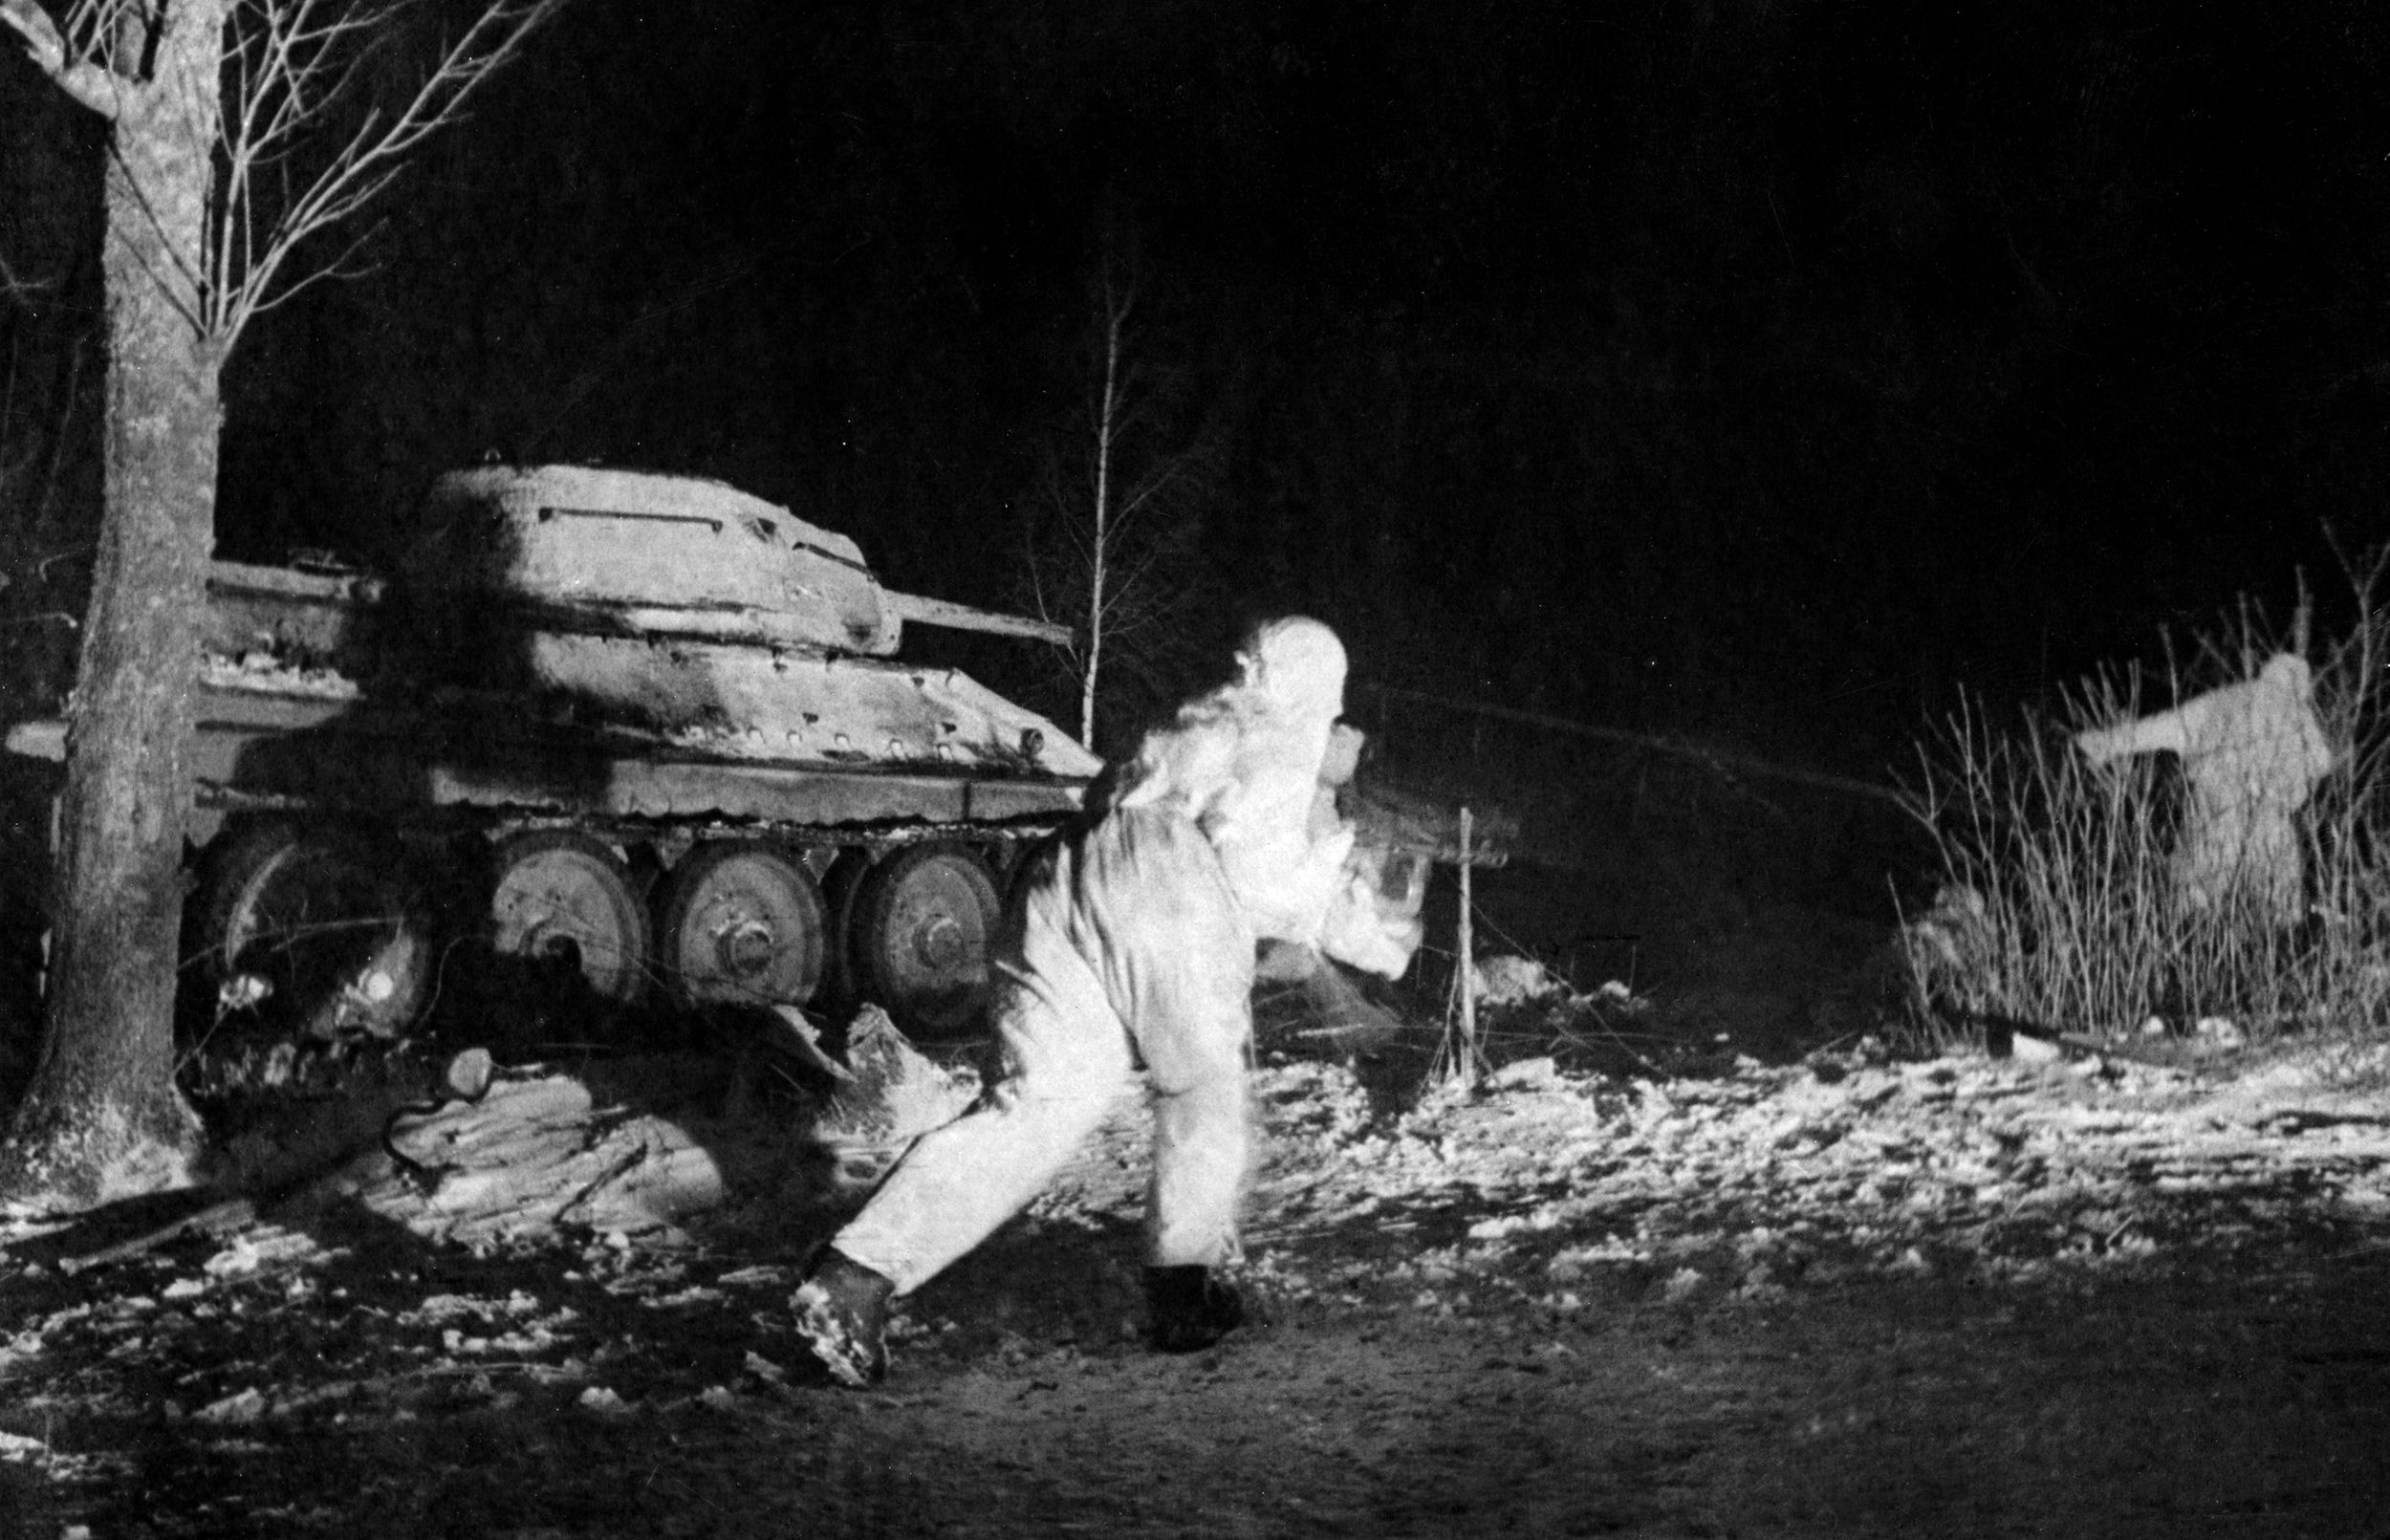 Soviet troops accompany a T-34 tank in a night attack in February, 1944. On the morning of February 13, Lieutenant-Colonel Franz Bäke called in an airstrike after two T-34s were spotted taking cover. Stukas attacked the ambush, flushing the Soviet tanks into the open, where Bäke’s Tiger battalion knocked out many from 2,000 yards. Bäke’s Panther battalion stopped a Russian flanking manuever as the Stukas took out antitank positions. The Germans claimed to have destroyed 70 tanks and 40 antitank guns against the loss of five Tigers and four Panthers.